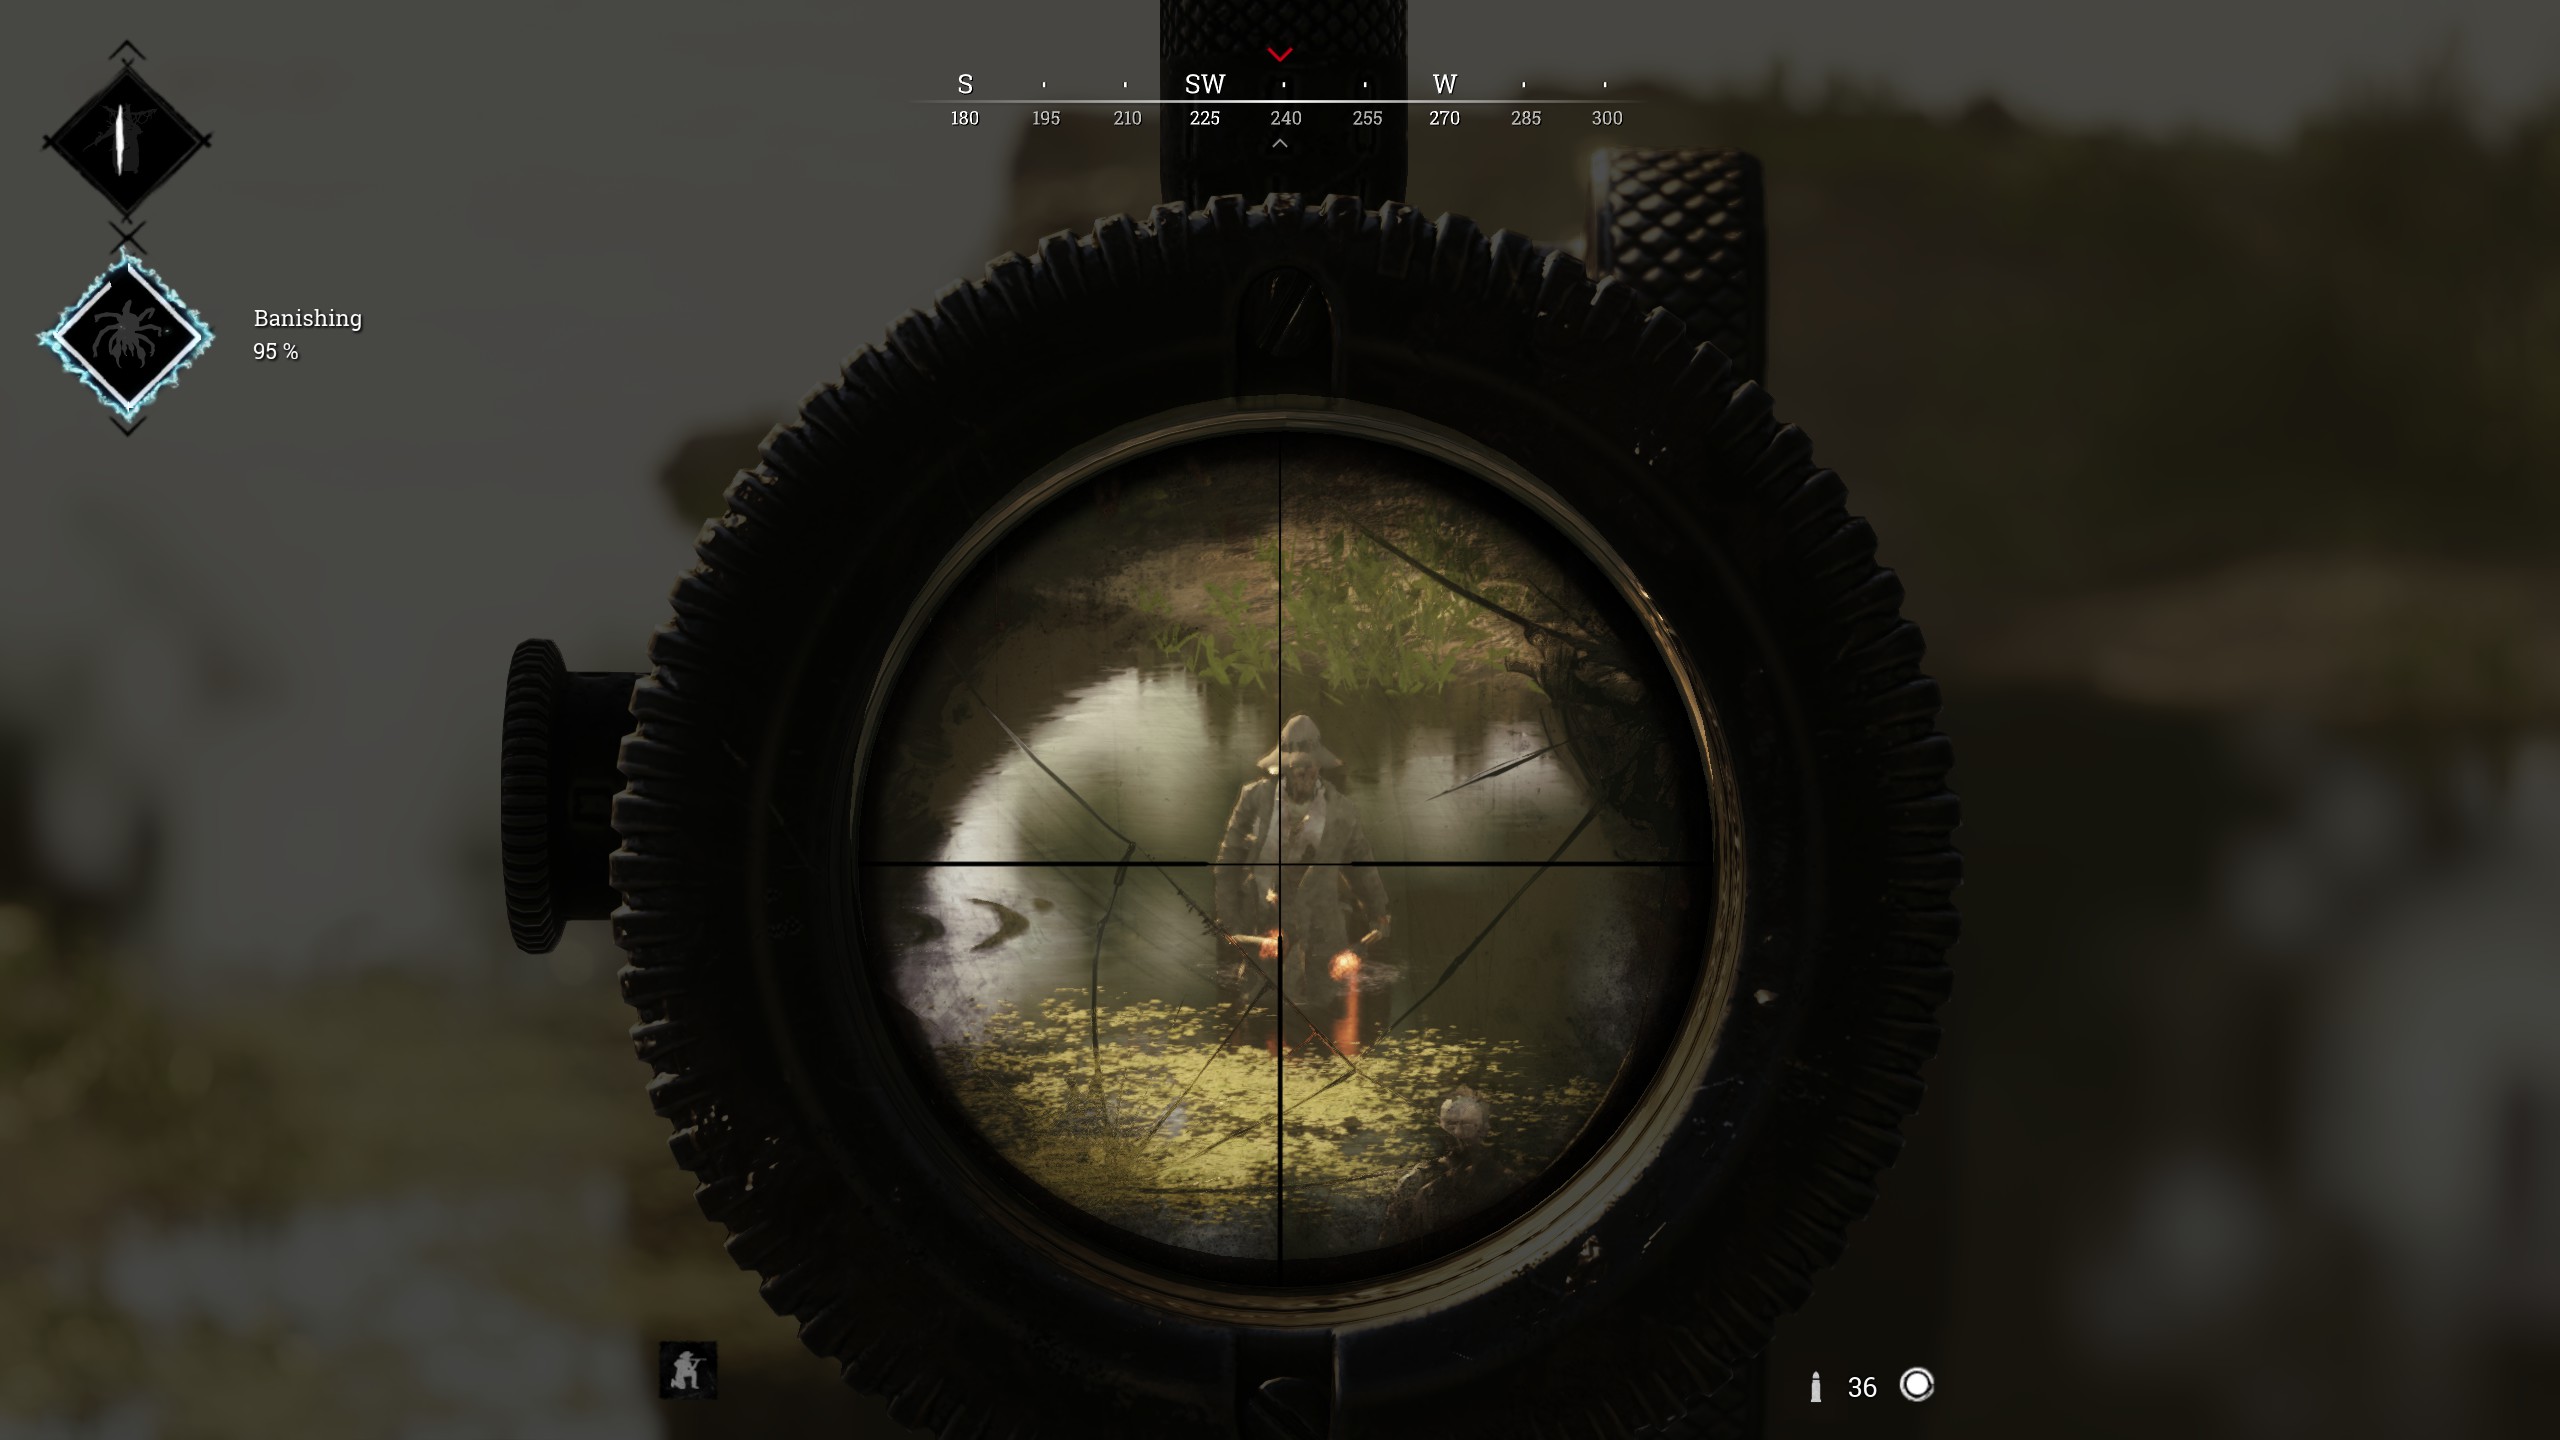 Looking through a scope at someone walking through a swamp